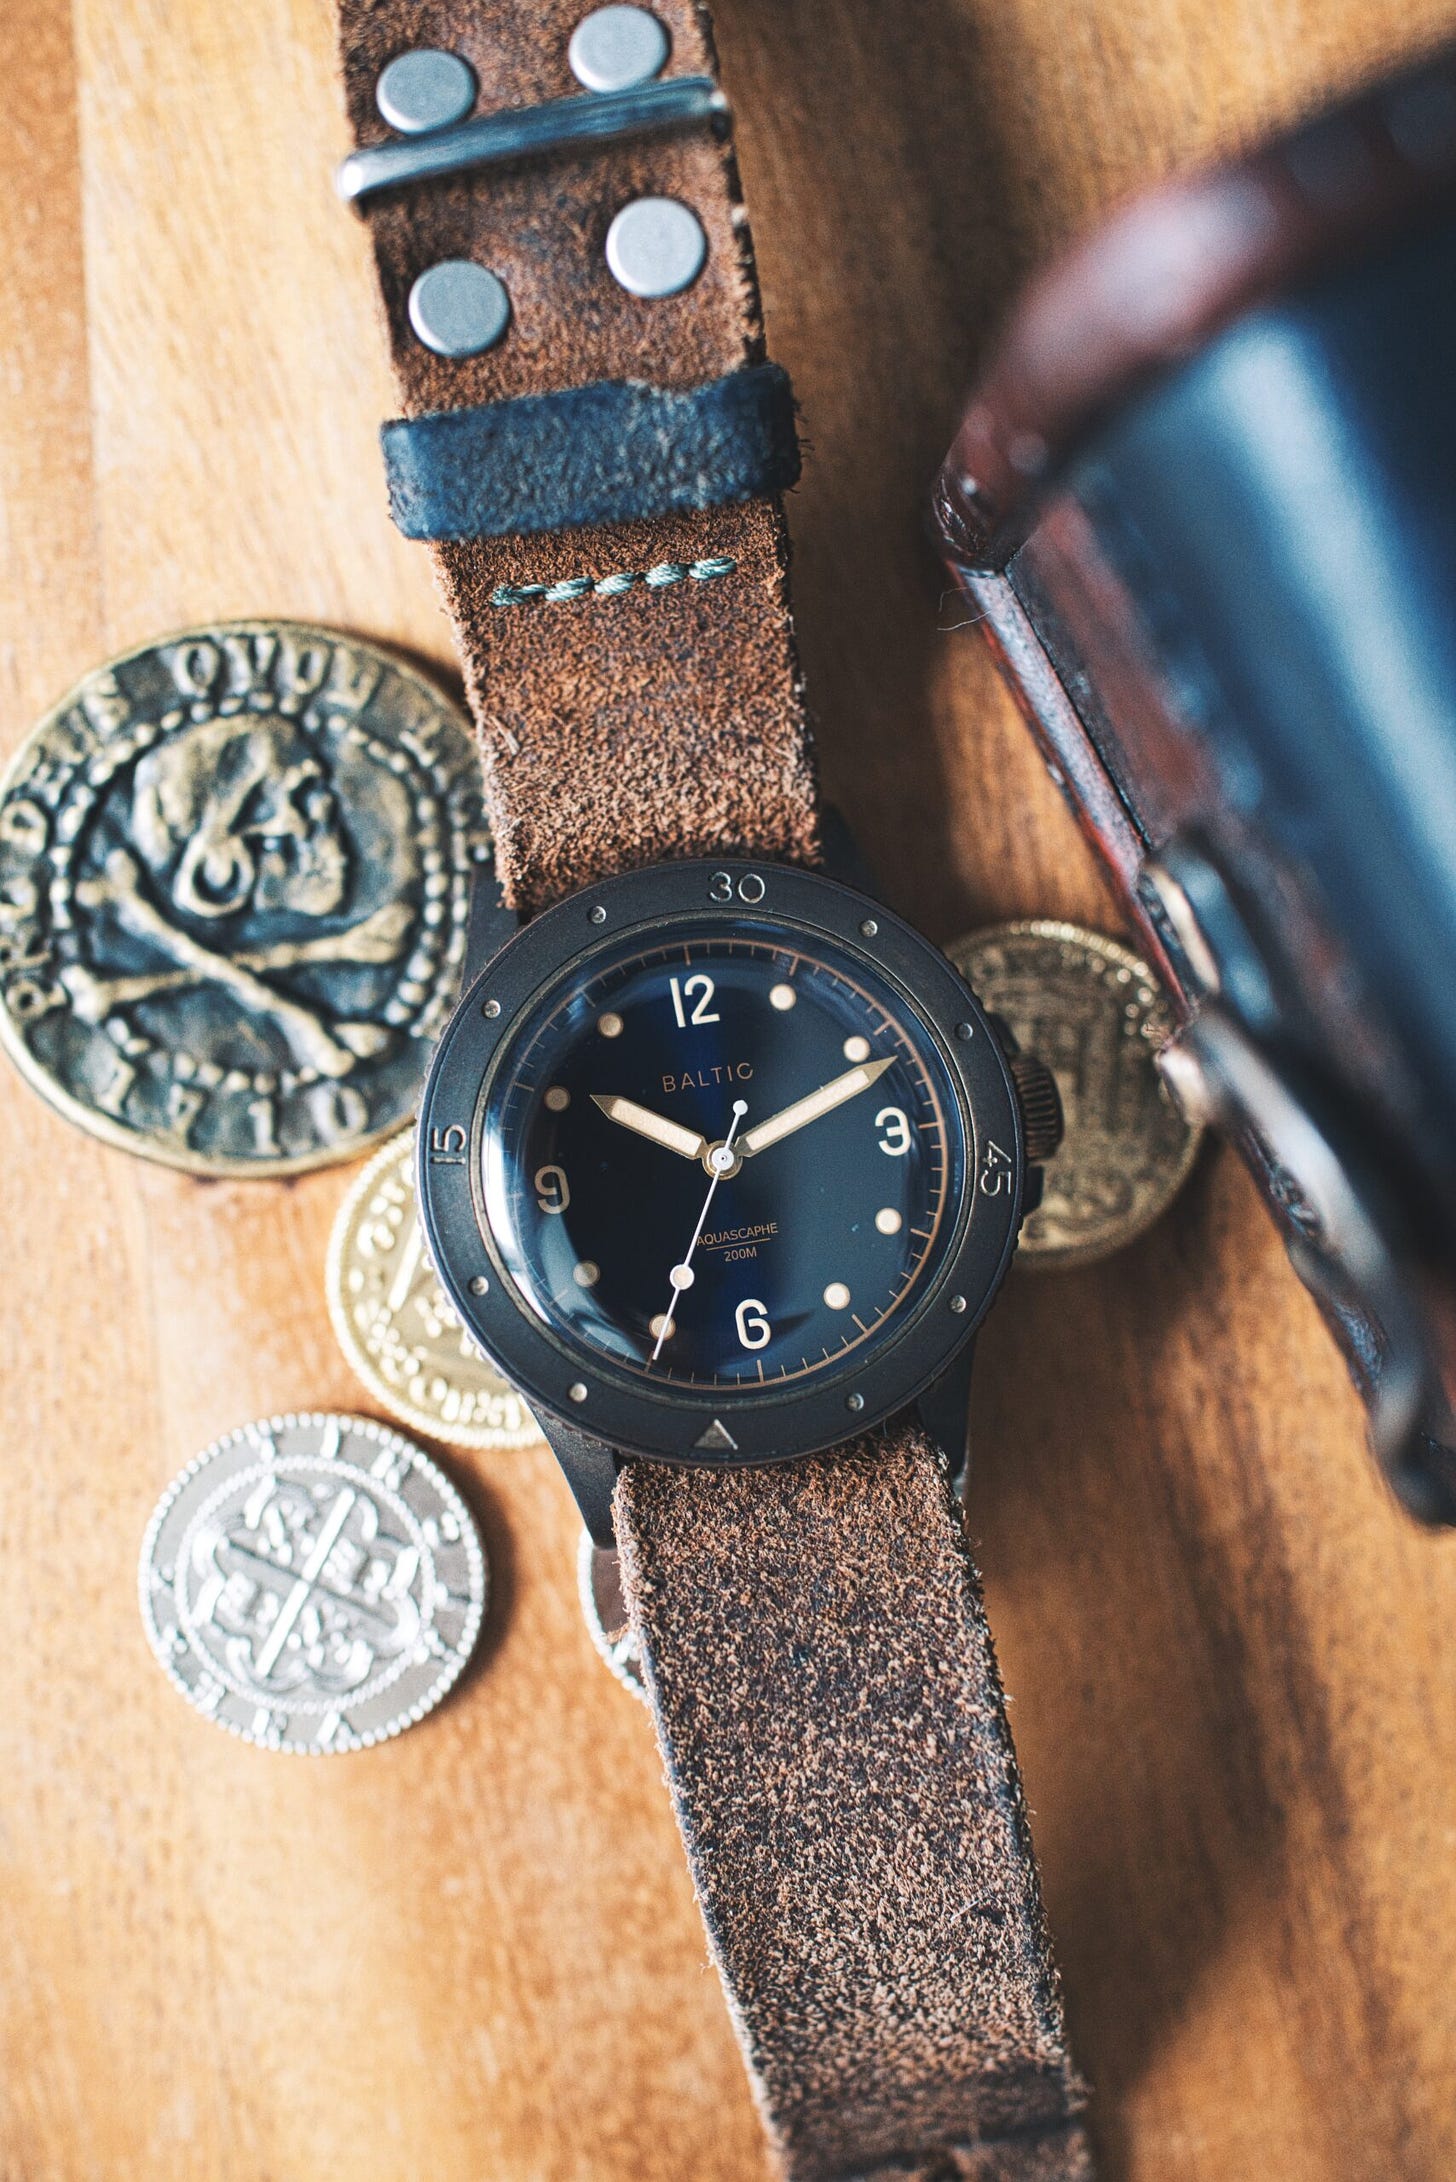 A very patinaed baltic bronze next to old pirate coins, near a small treasure chest sitting atop a wood desktop. Watch on a worn rough leather strap.